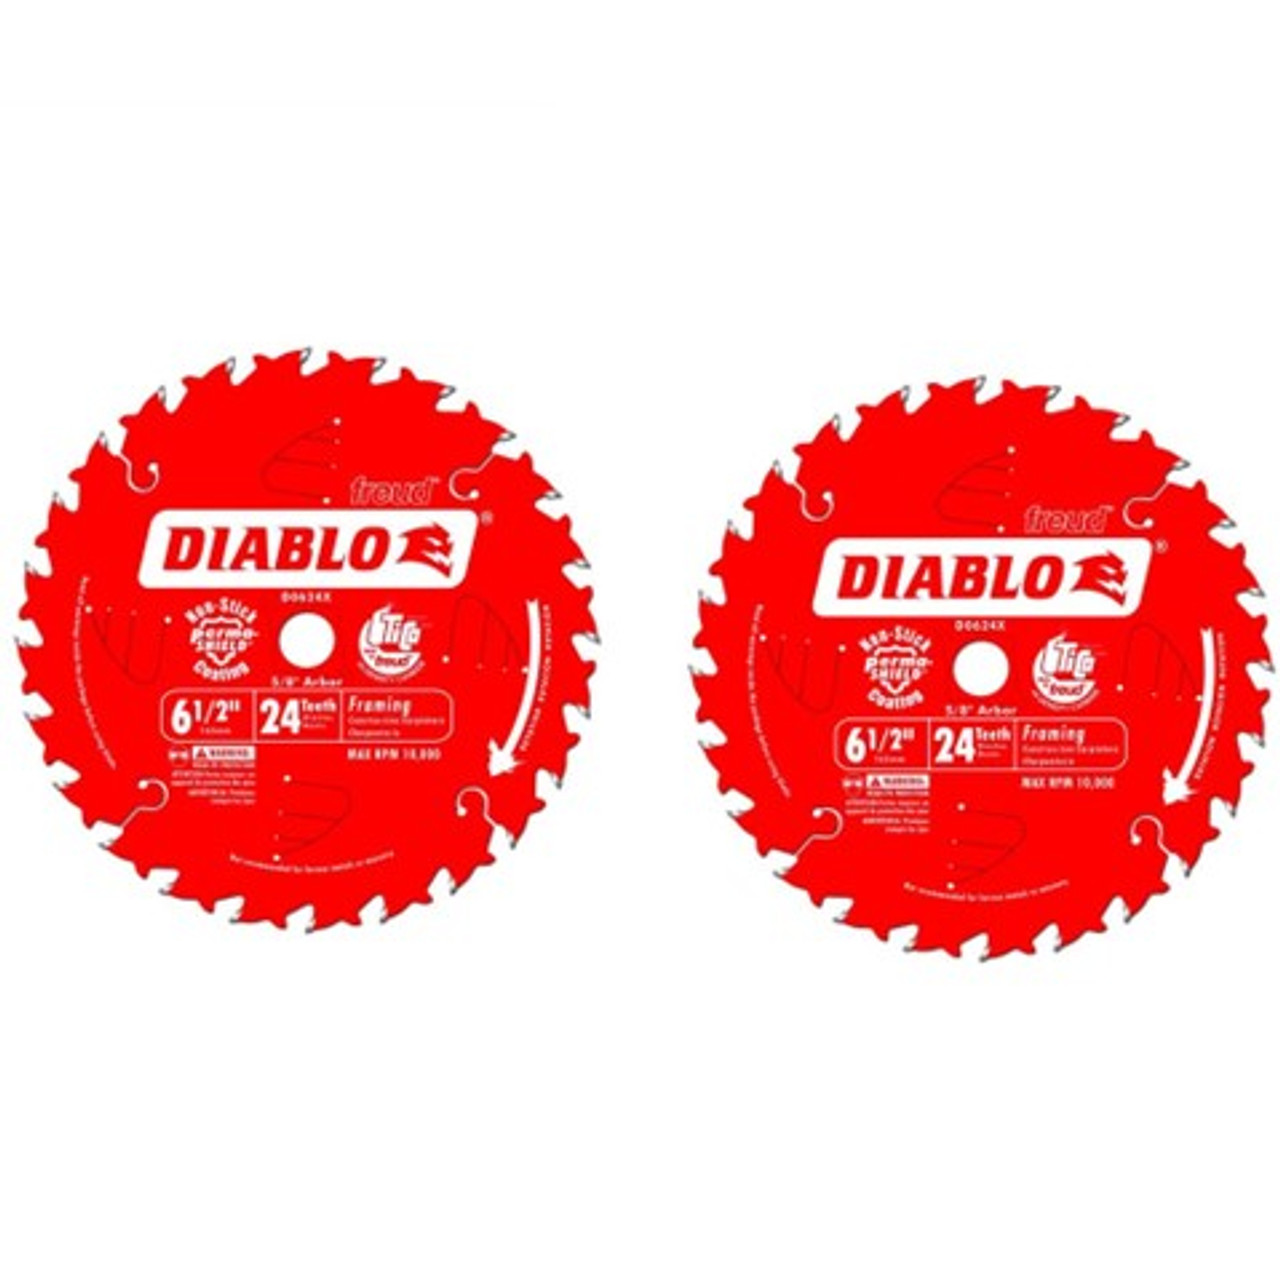 Diablo D0624PX 6-1/2″ 24-Tooth Wood Cutting Framing Saw Blade 2-Pack